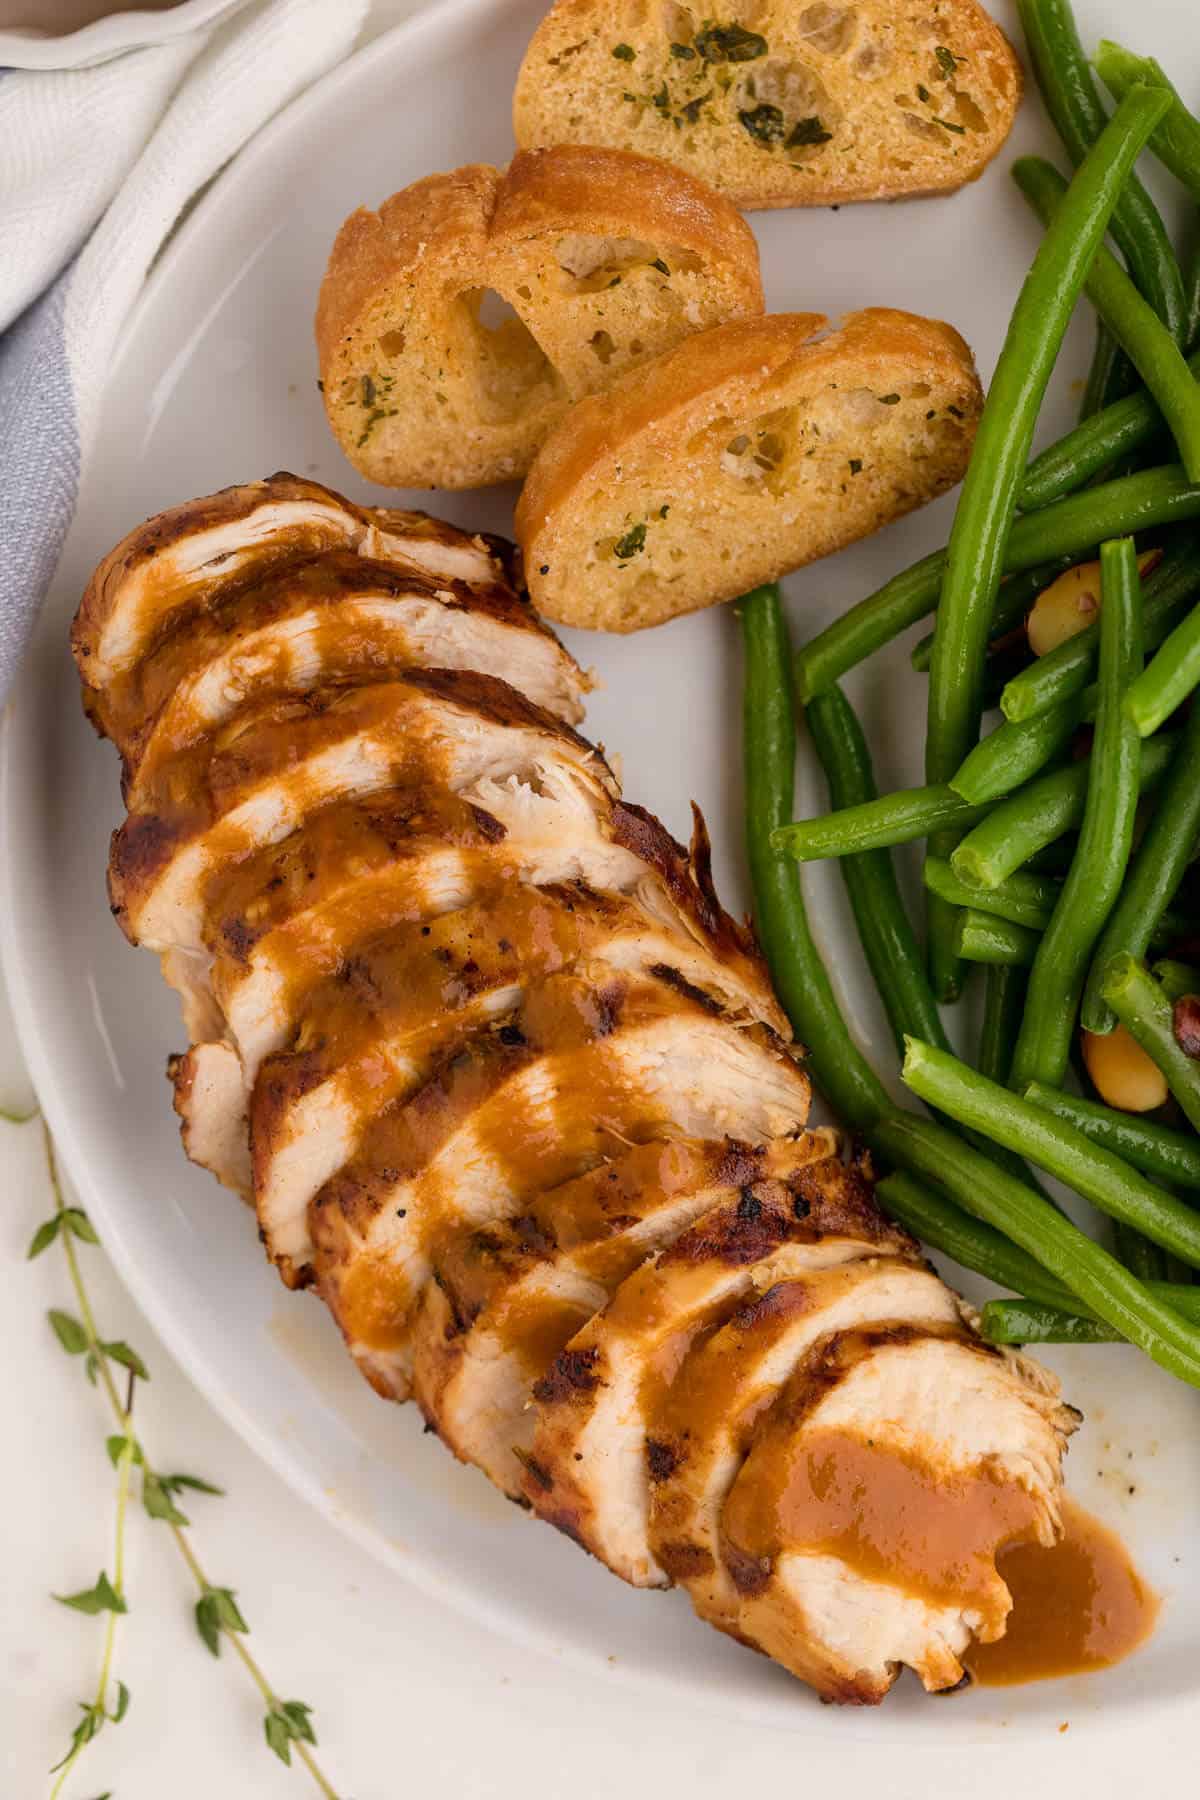 A sliced grilled herb chicken breast on a plate with garlic bread and green beans.